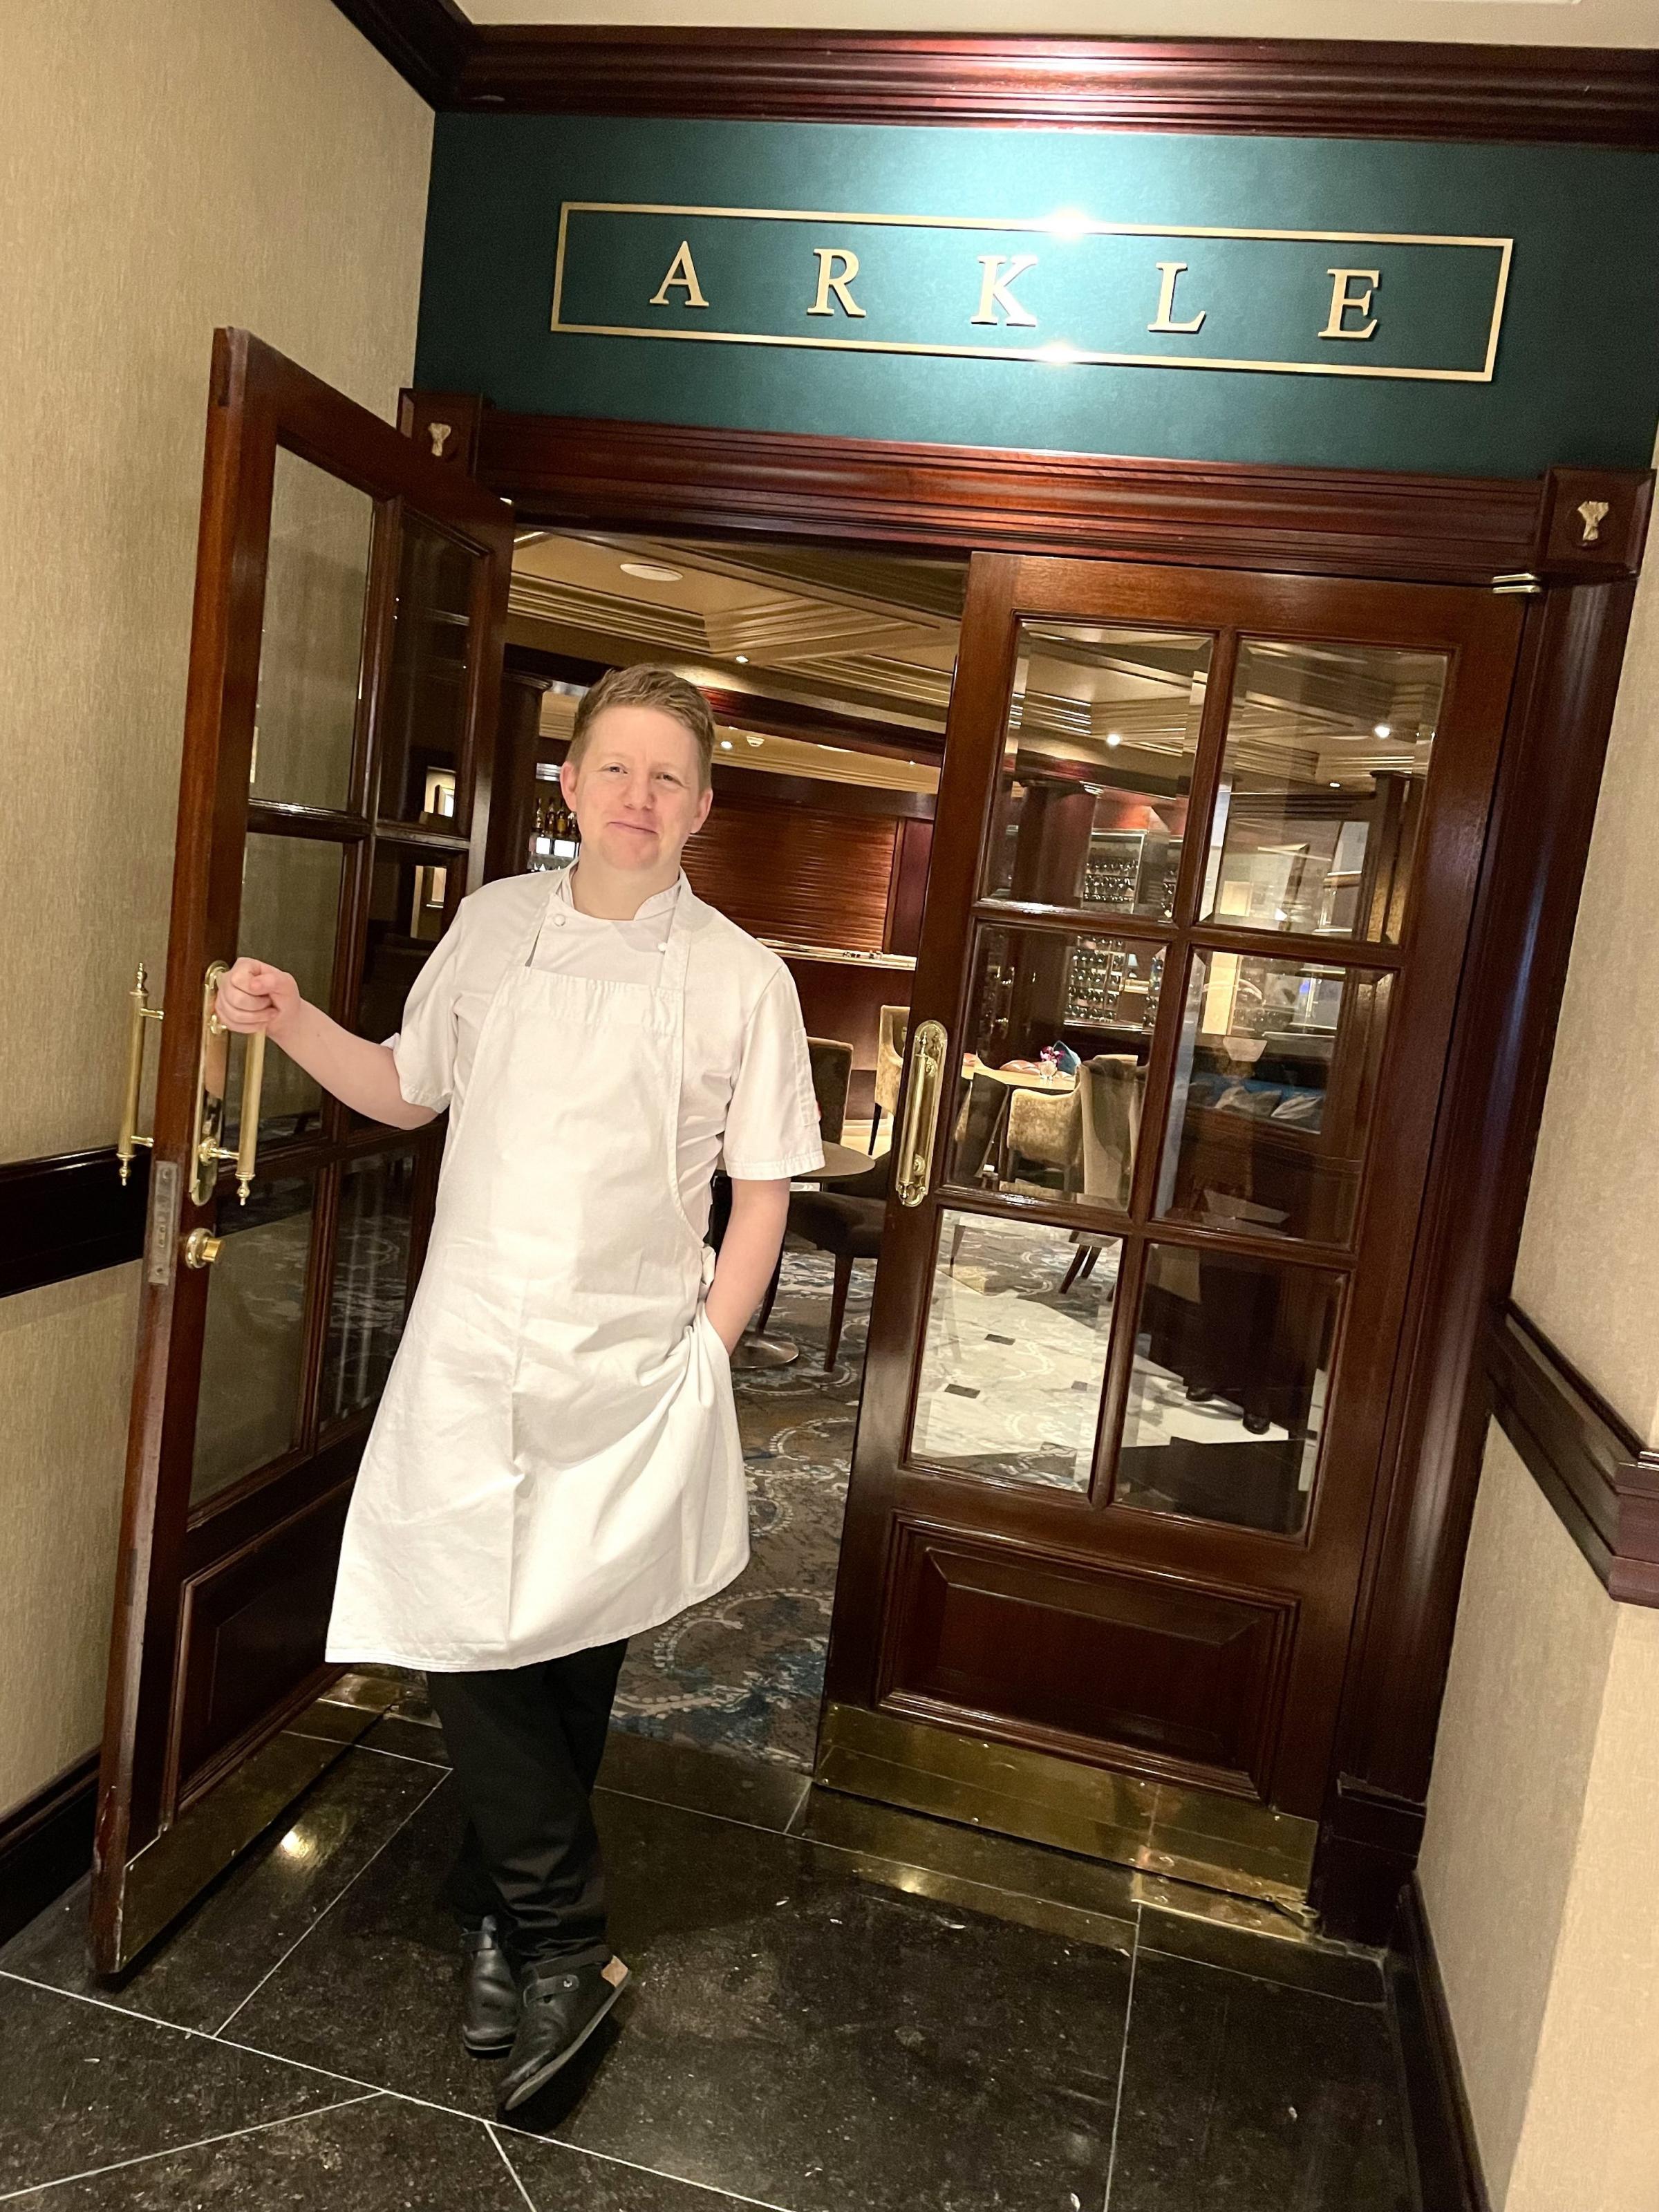 Elliot Hill, Executive Chef at The Chester Grosvenor.